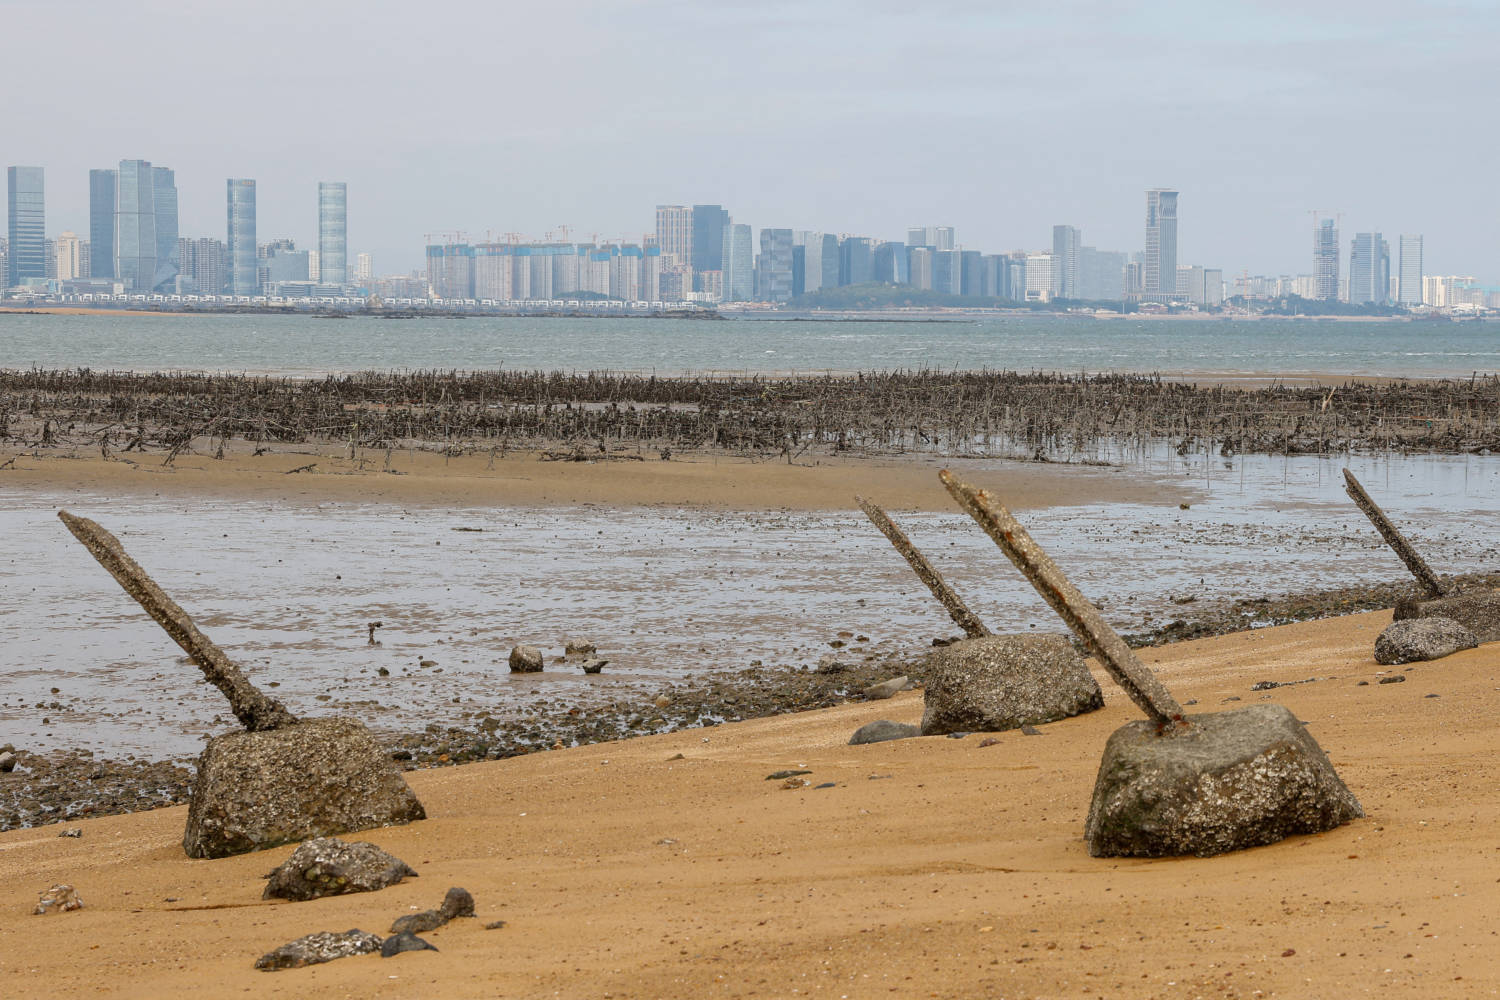 File Photo: Anti Landing Barricades Are Seen On The Beach With China's Xiamen In The Background In Kinmen